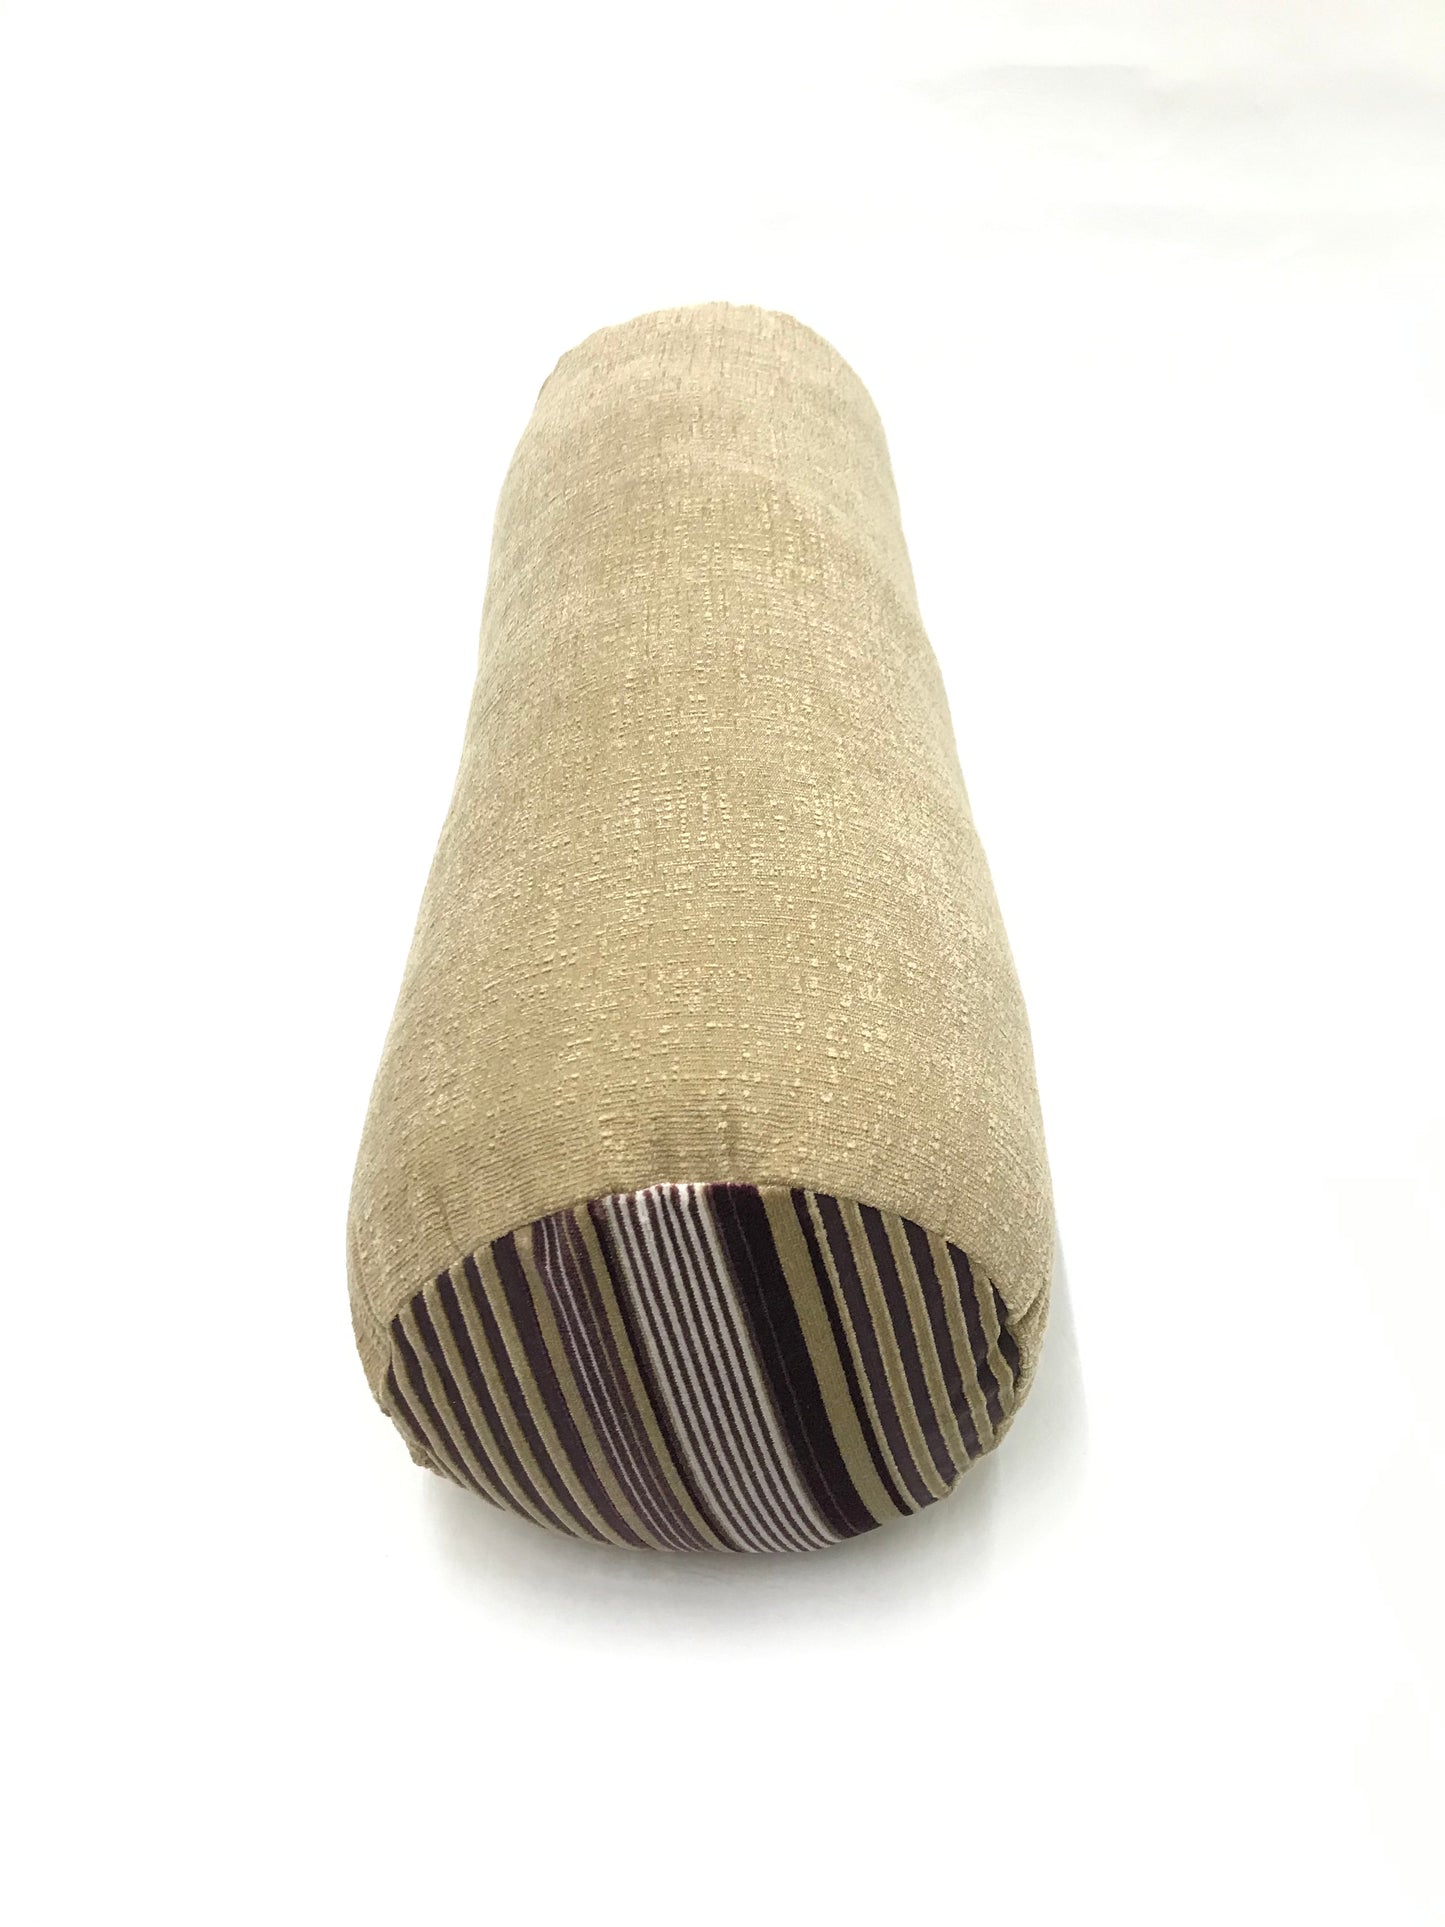 Round yoga bolster in plush brown fabric with matching purple and brown stripe fabric. Allergy conscious fill with removeable cover. Made in Canada by My Yoga Room Elements